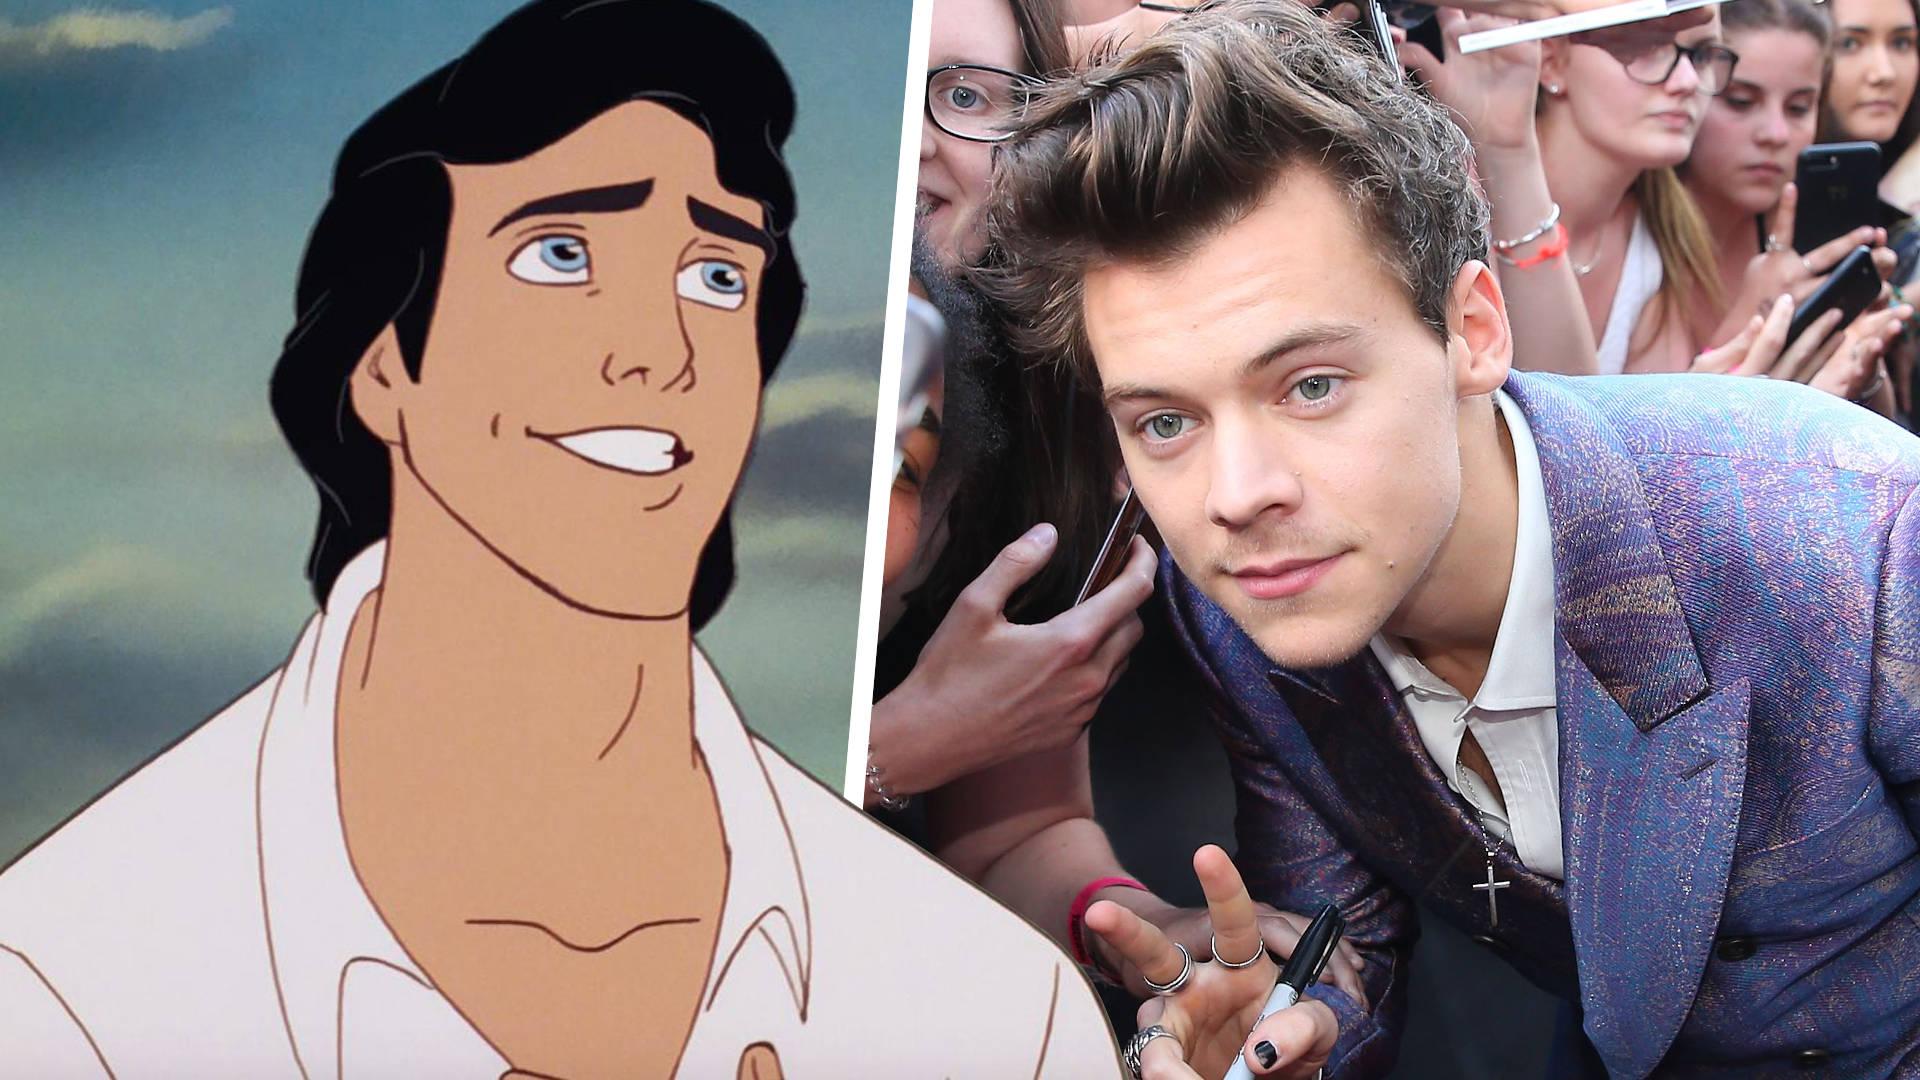 What actually happened with Harry Styles' Prince Eric casting?